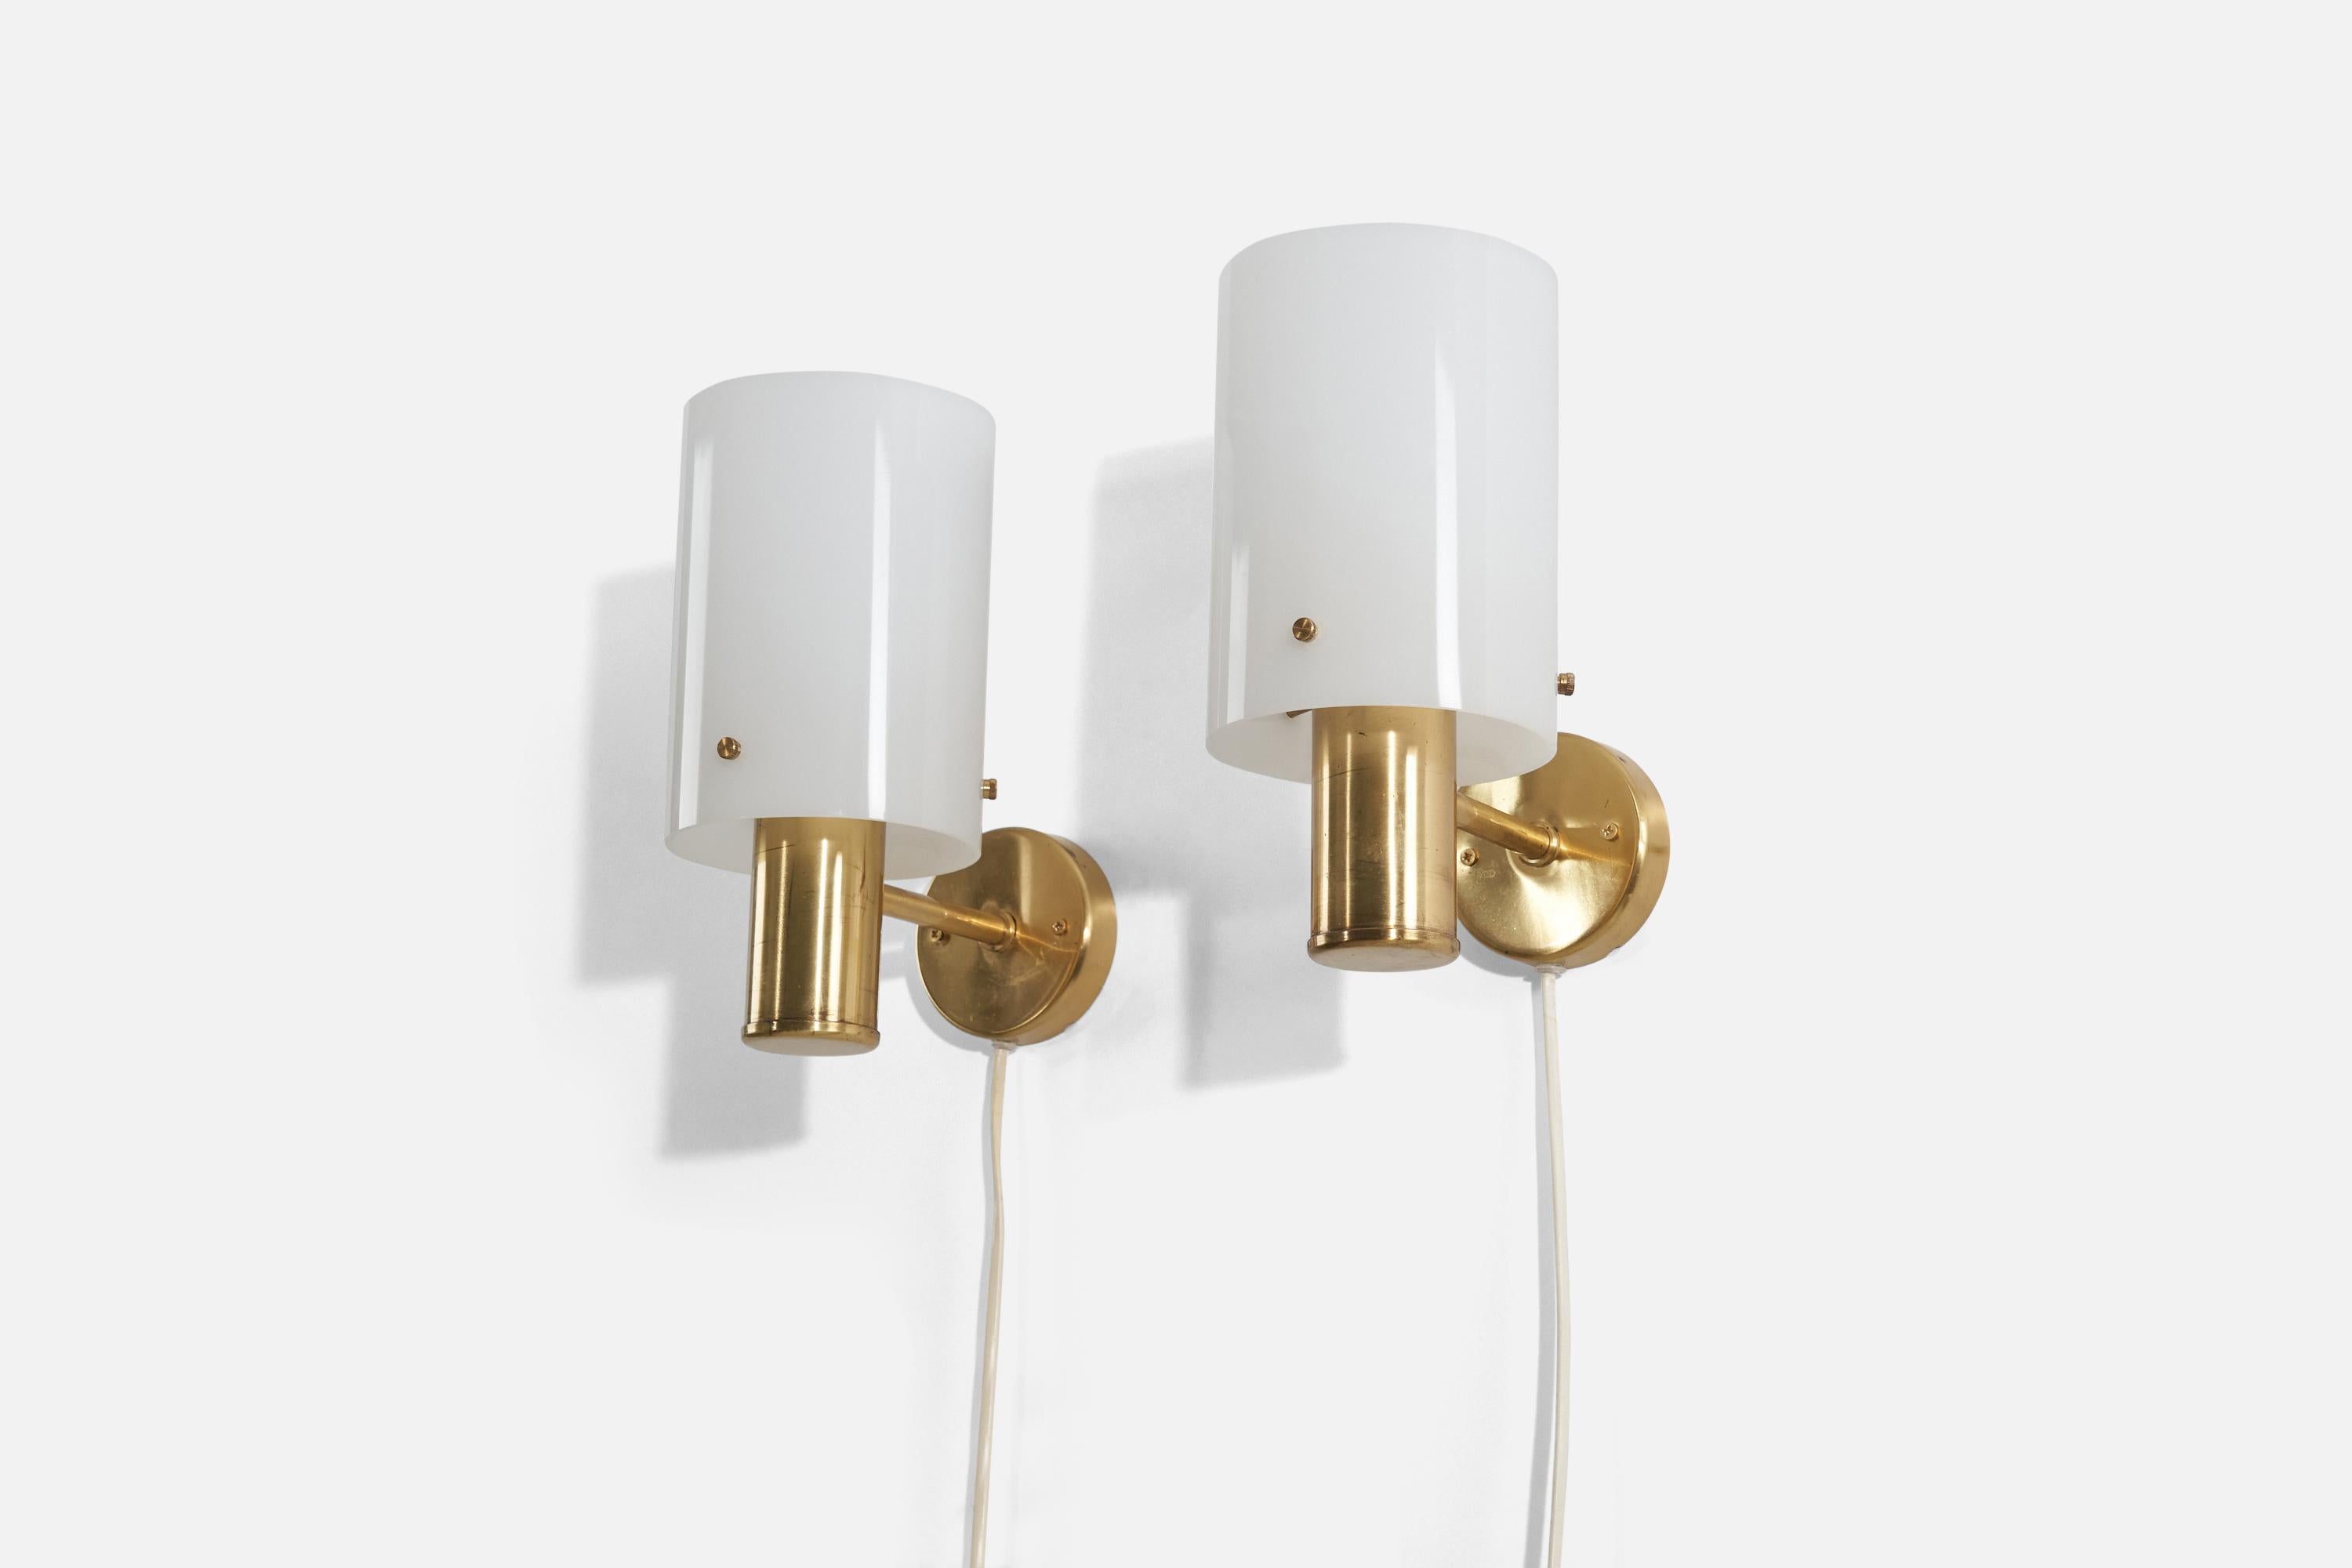 A pair of brass and acrylic wall lights produced by a Swedish designer, Sweden, 1960s.

Dimensions of the back plate (inches) : 3.4375 x 3.4375 x 0.875 (H x W x D).